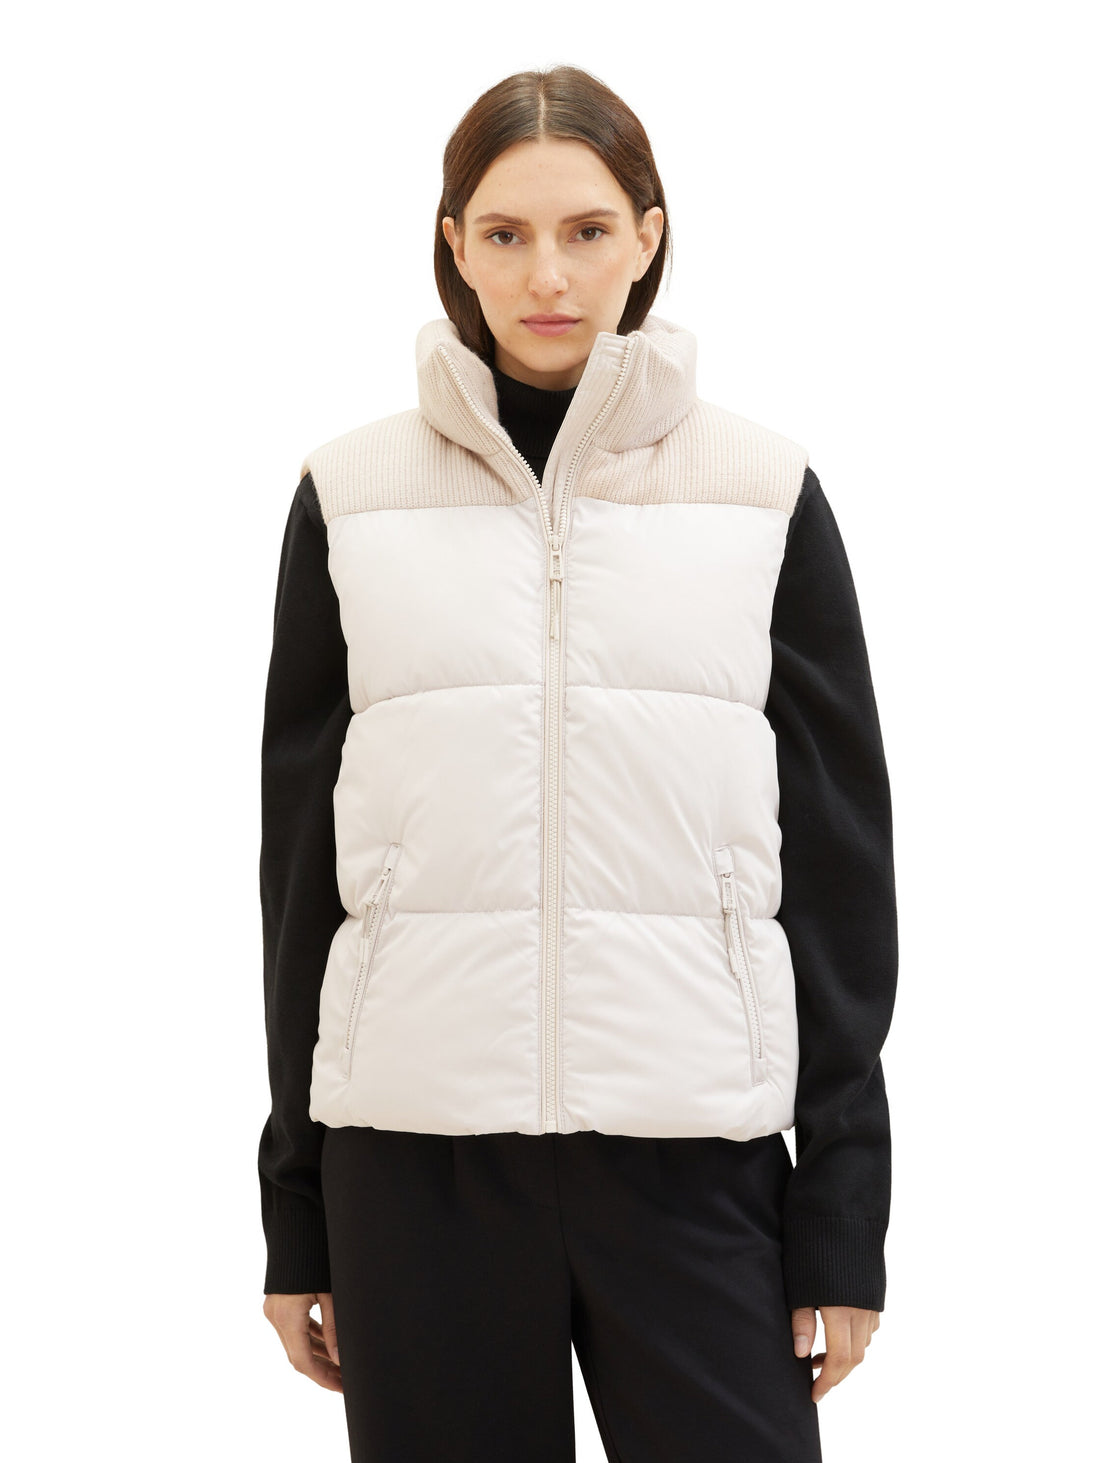 Padded Vest With High Collar_1038676_16339_02